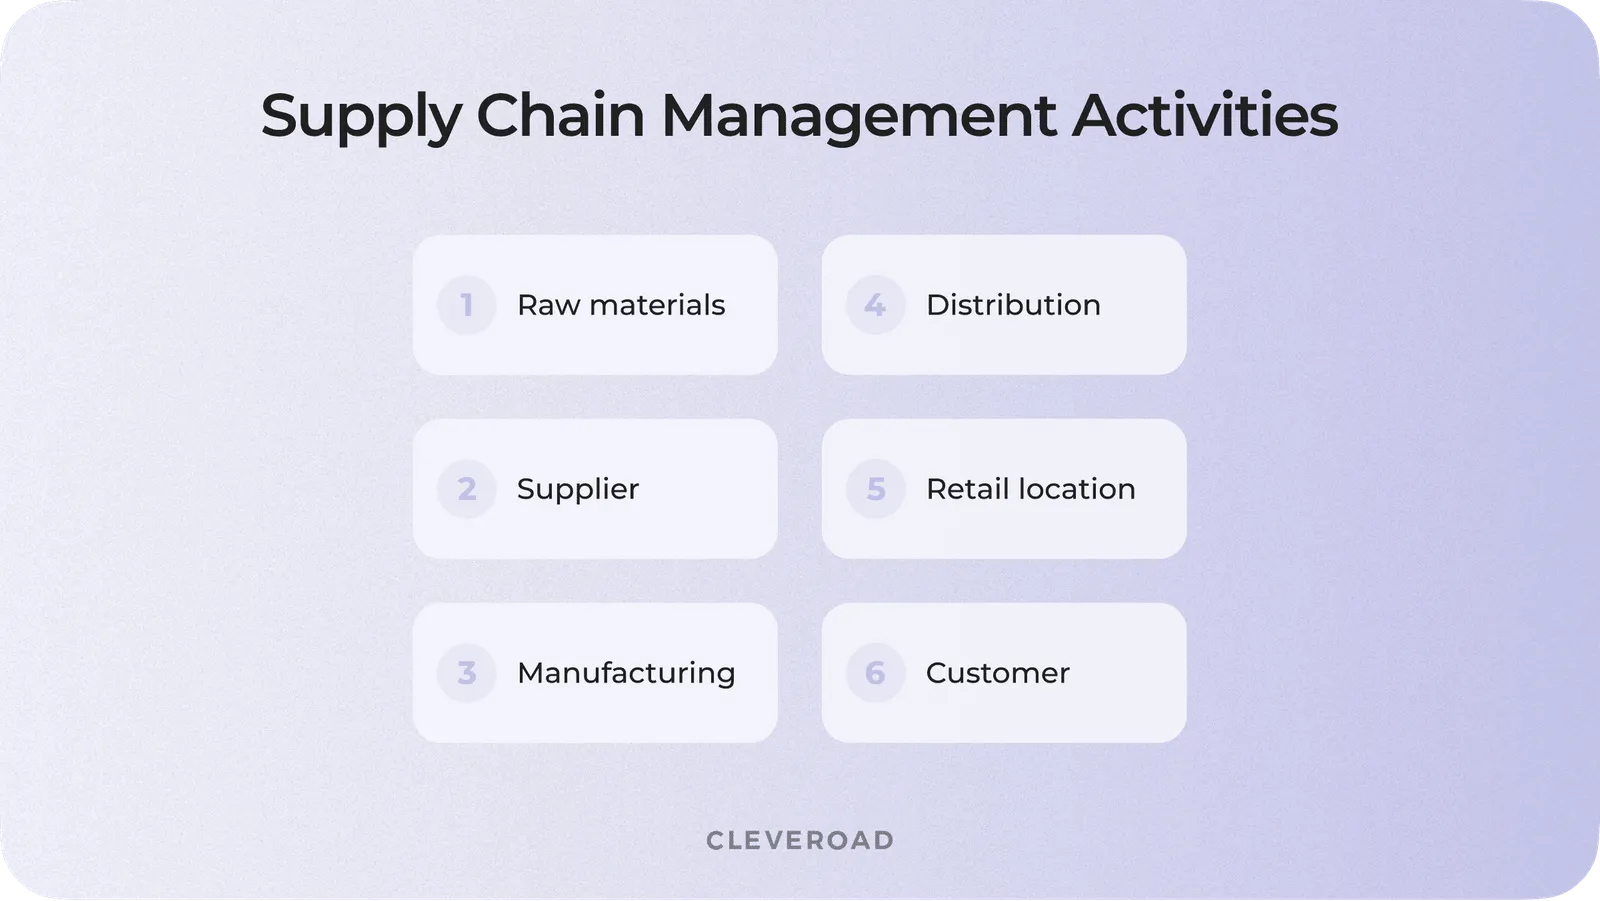 The variety of the supply chain activities